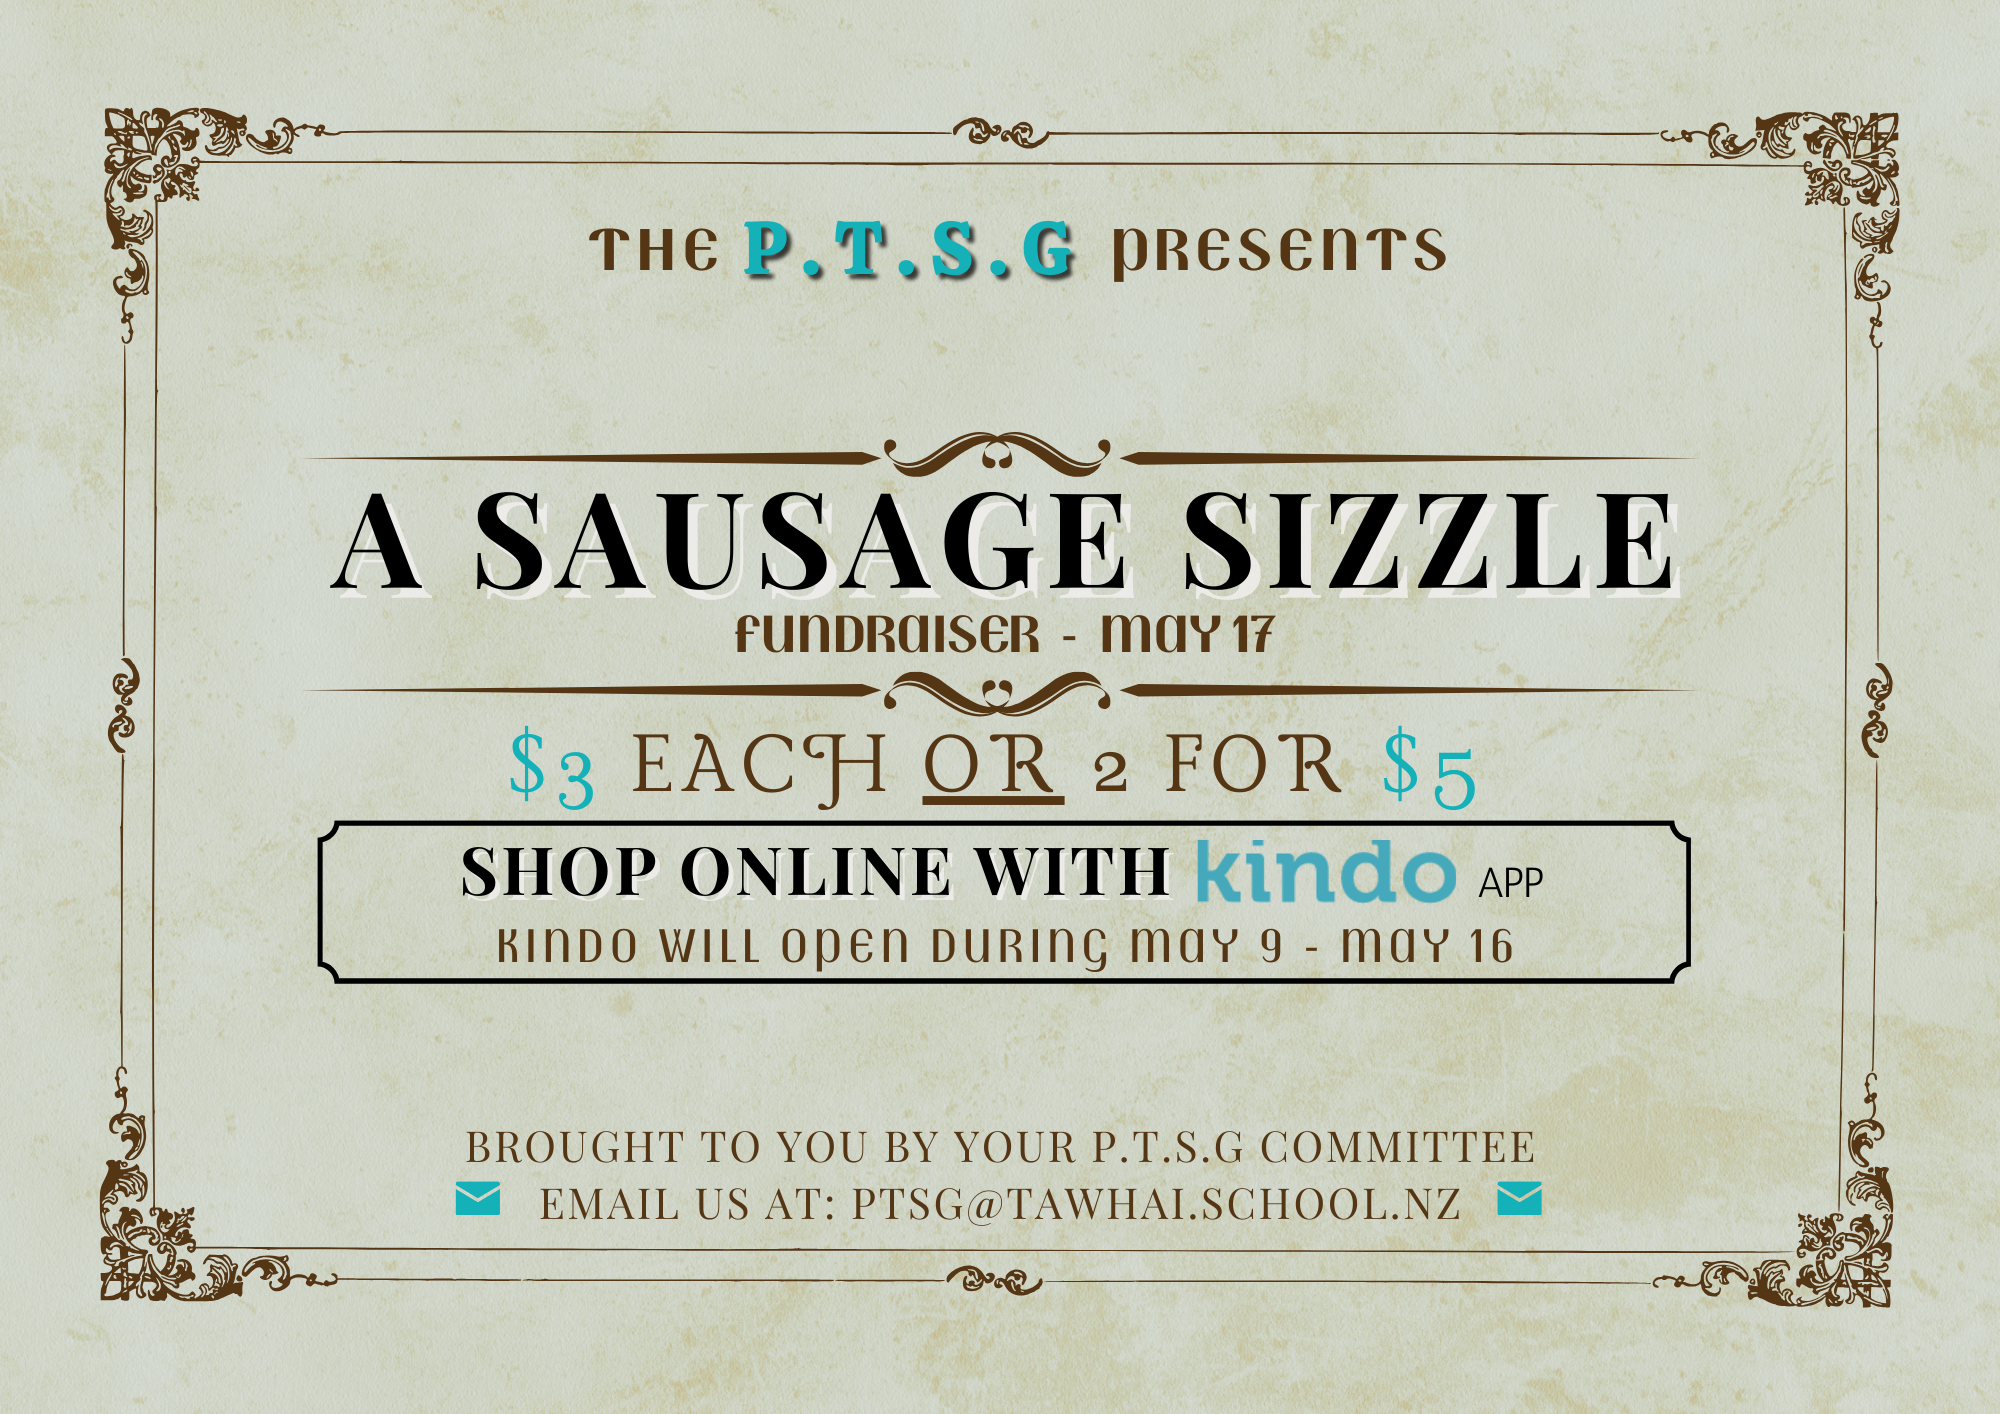 Sausage Sizzle this Coming Friday 17th May